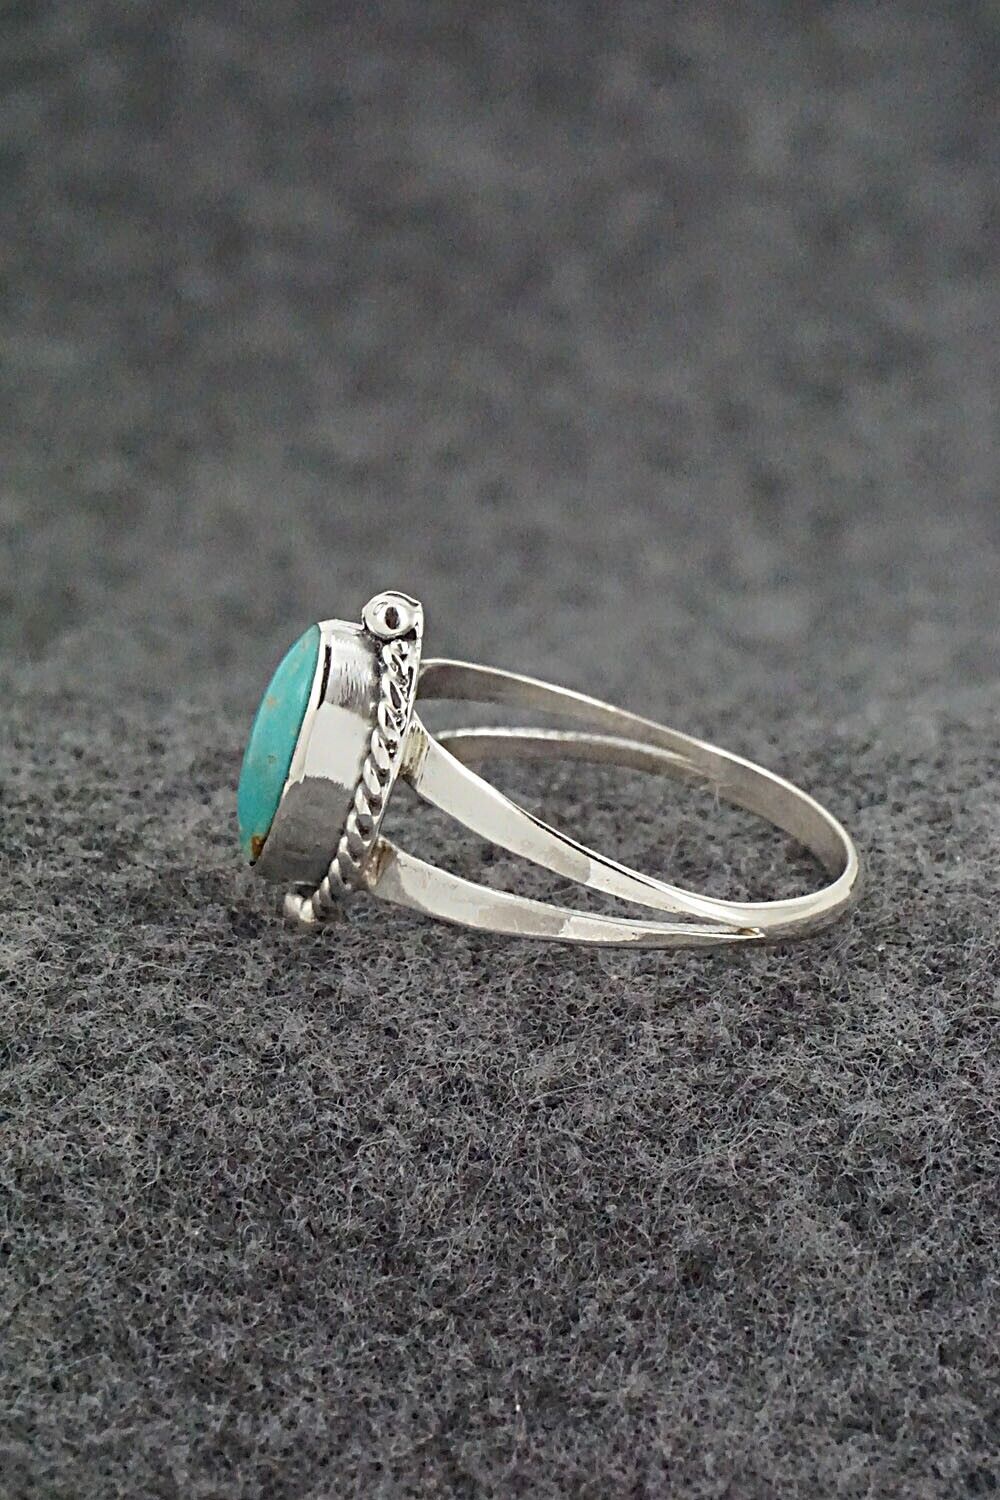 Turquoise & Sterling Silver Ring - Alice Rose Saunders - Size 8.75